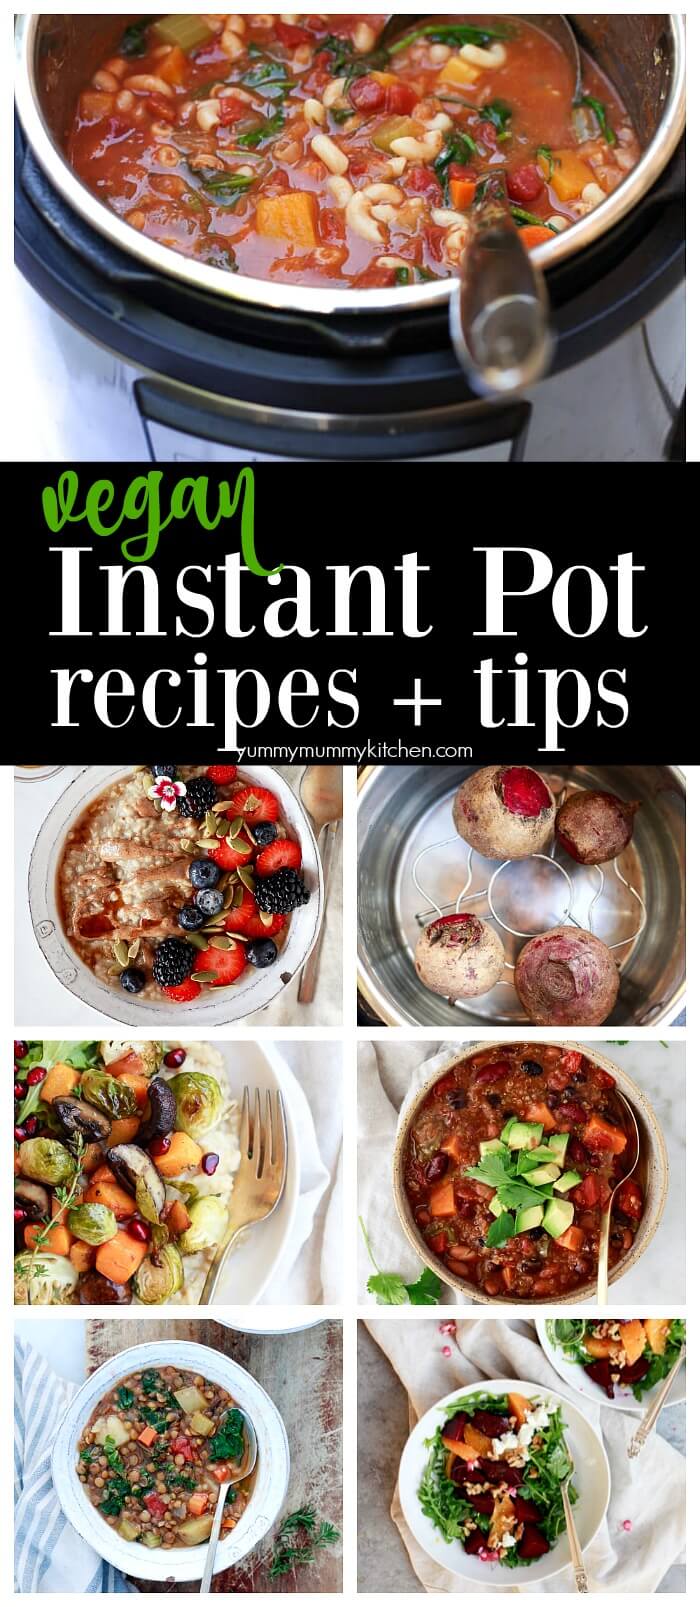 The best vegetarian, vegan, plant-based Instant Pot recipes! From healthy vegan Instant Pot dinners, to soups, chili, risotto, and chocolate cake, this is the ultimate list of vegan Instant Pot recipes. 